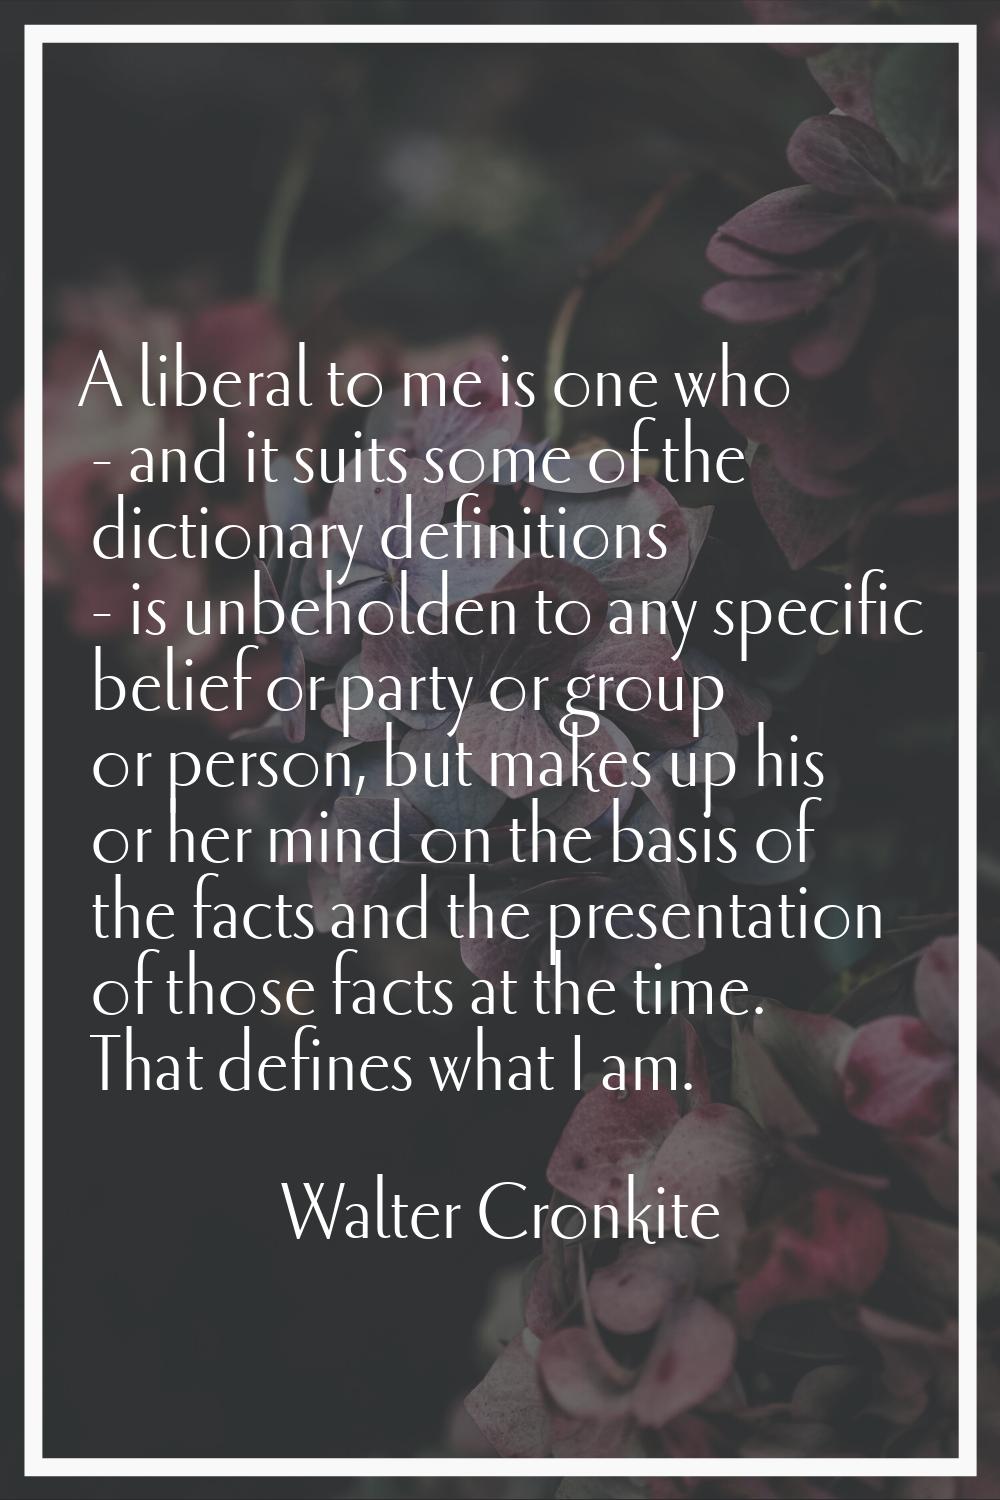 A liberal to me is one who - and it suits some of the dictionary definitions - is unbeholden to any